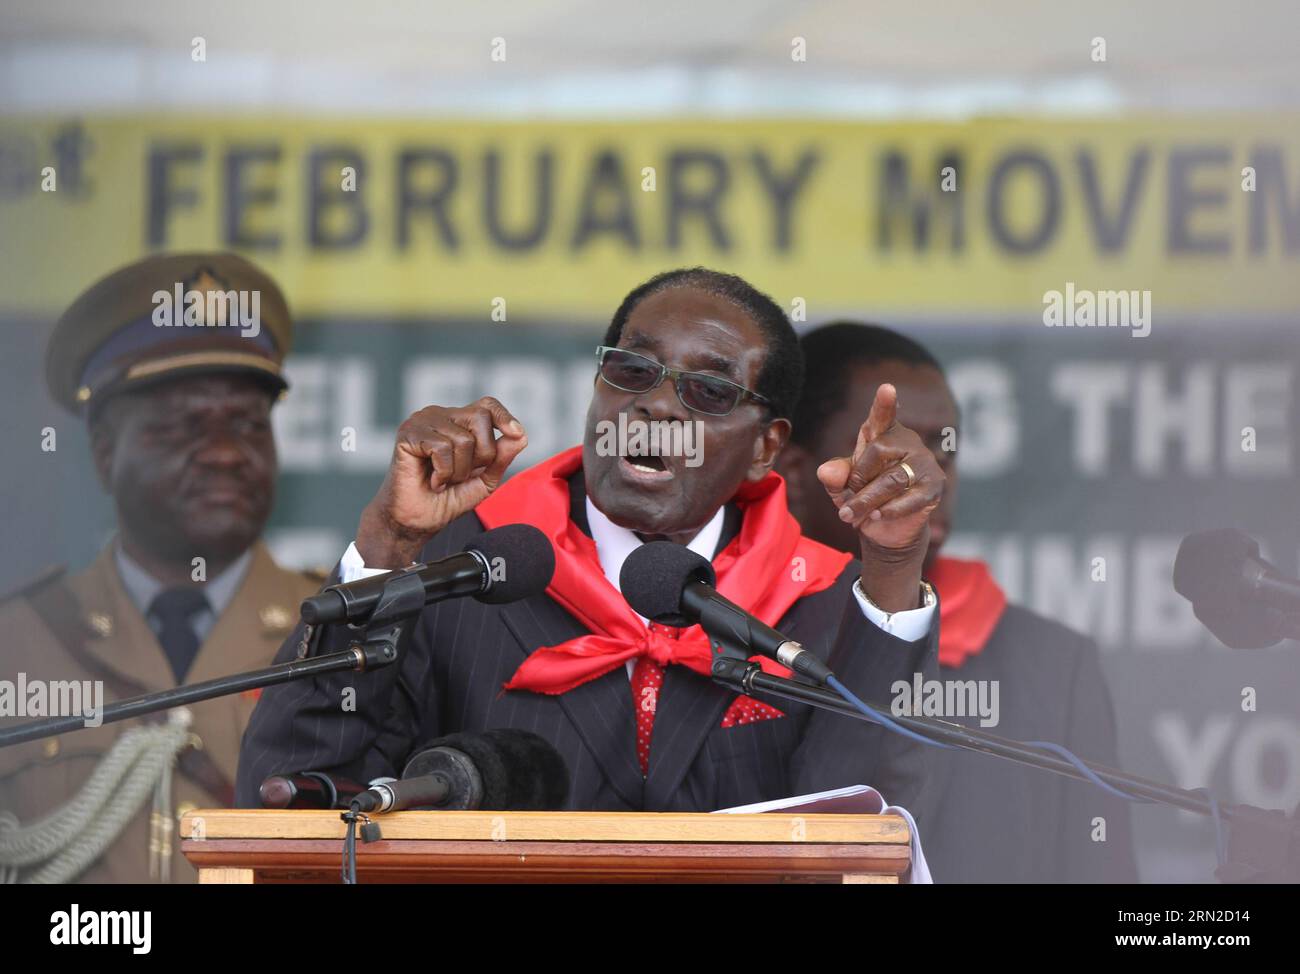 (150228) -- VICTORIA FALLS (ZIMBABWE), Feb. 28, 2015 () -- Zimbabwean President Robert Mugabe addresses at a public celebration held to mark his 91st birthday in Victoria Falls, Zimbabwe, Feb. 28, 2015. Mugabe, who turns 91 this month, is the oldest leader in the world and one of the longest-serving African statesmen. Having ruled Zimbabwe for 35 years since independence, Mugabe was endorsed by the ruling ZANU-PF party as the sole candidate to contest at the age of 94 in the next presidential election in 2018. () ZIMBABWE-VICTORIA FALLS-MUGABE-BIRTHDAY Xinhua PUBLICATIONxNOTxINxCHN   Victoria Stock Photo